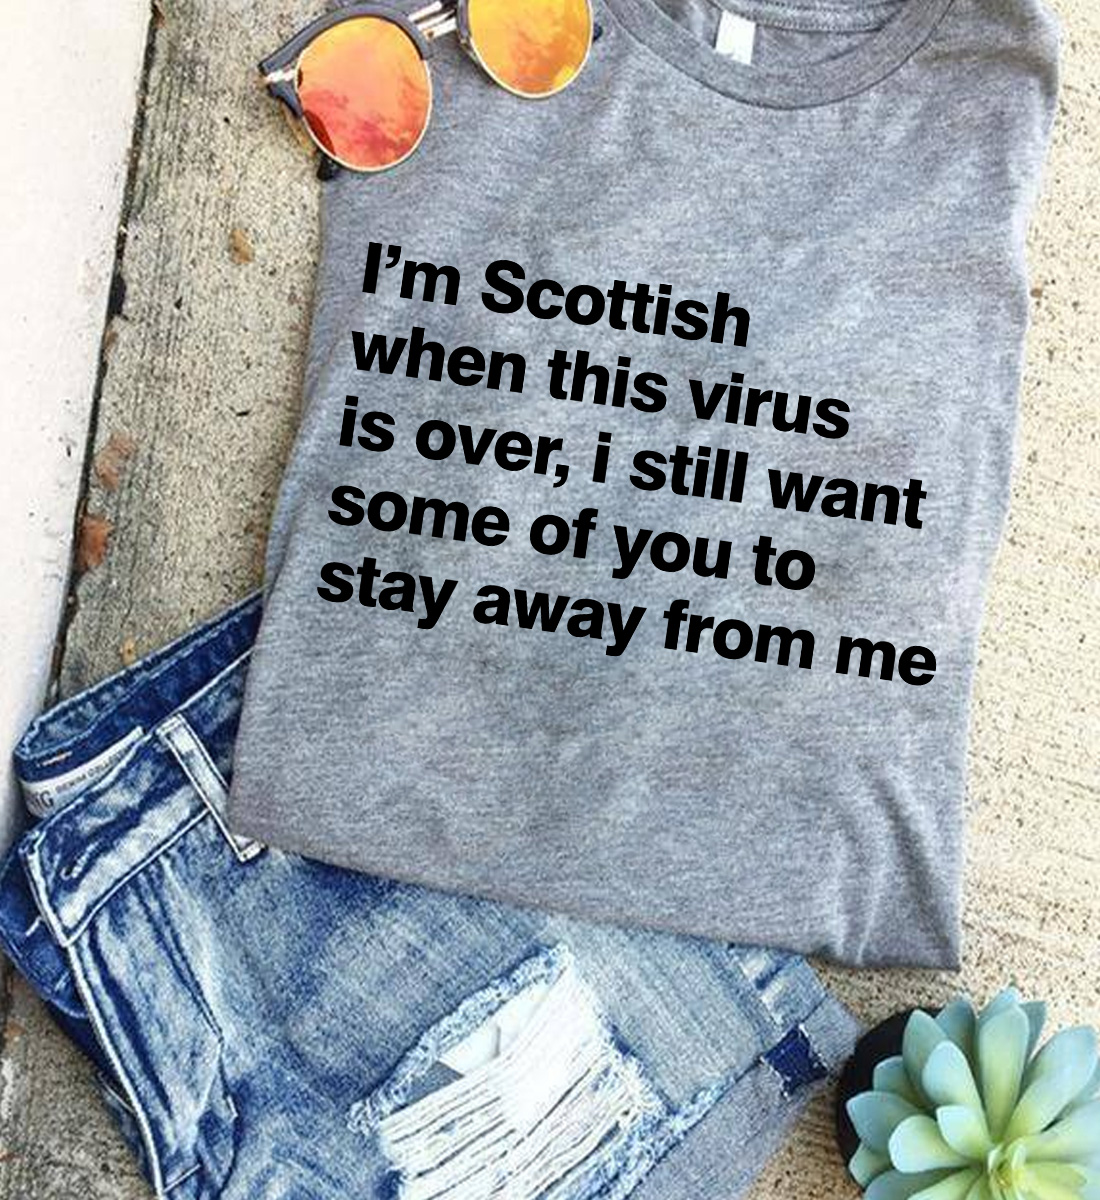 I'm Scottish when this virus is over, i still want some of you to stay away from me